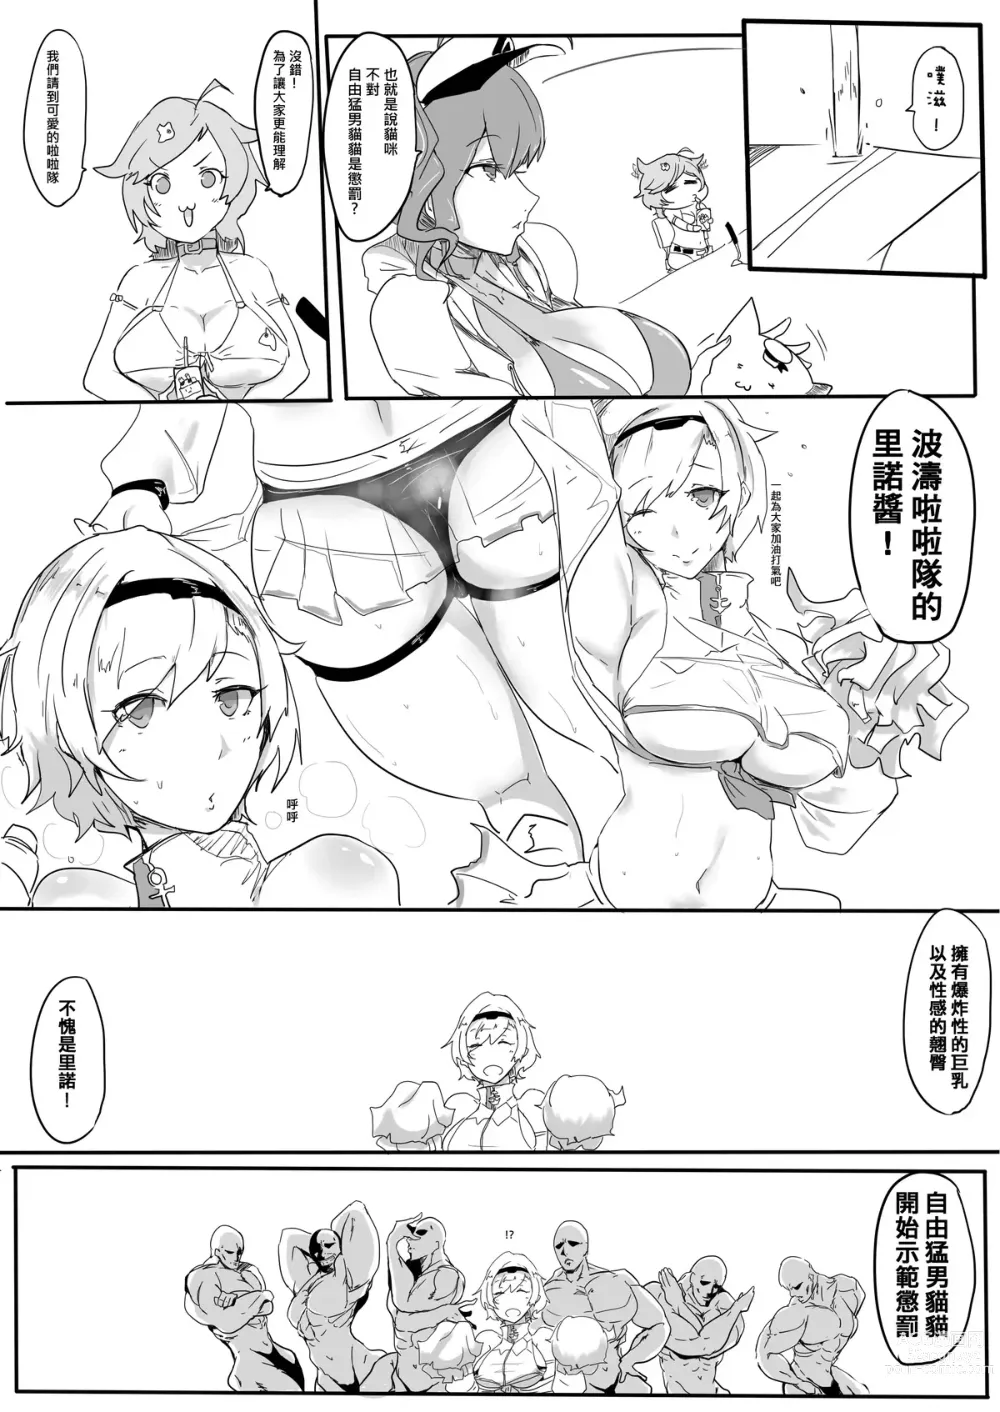 Page 5 of doujinshi Tennis party